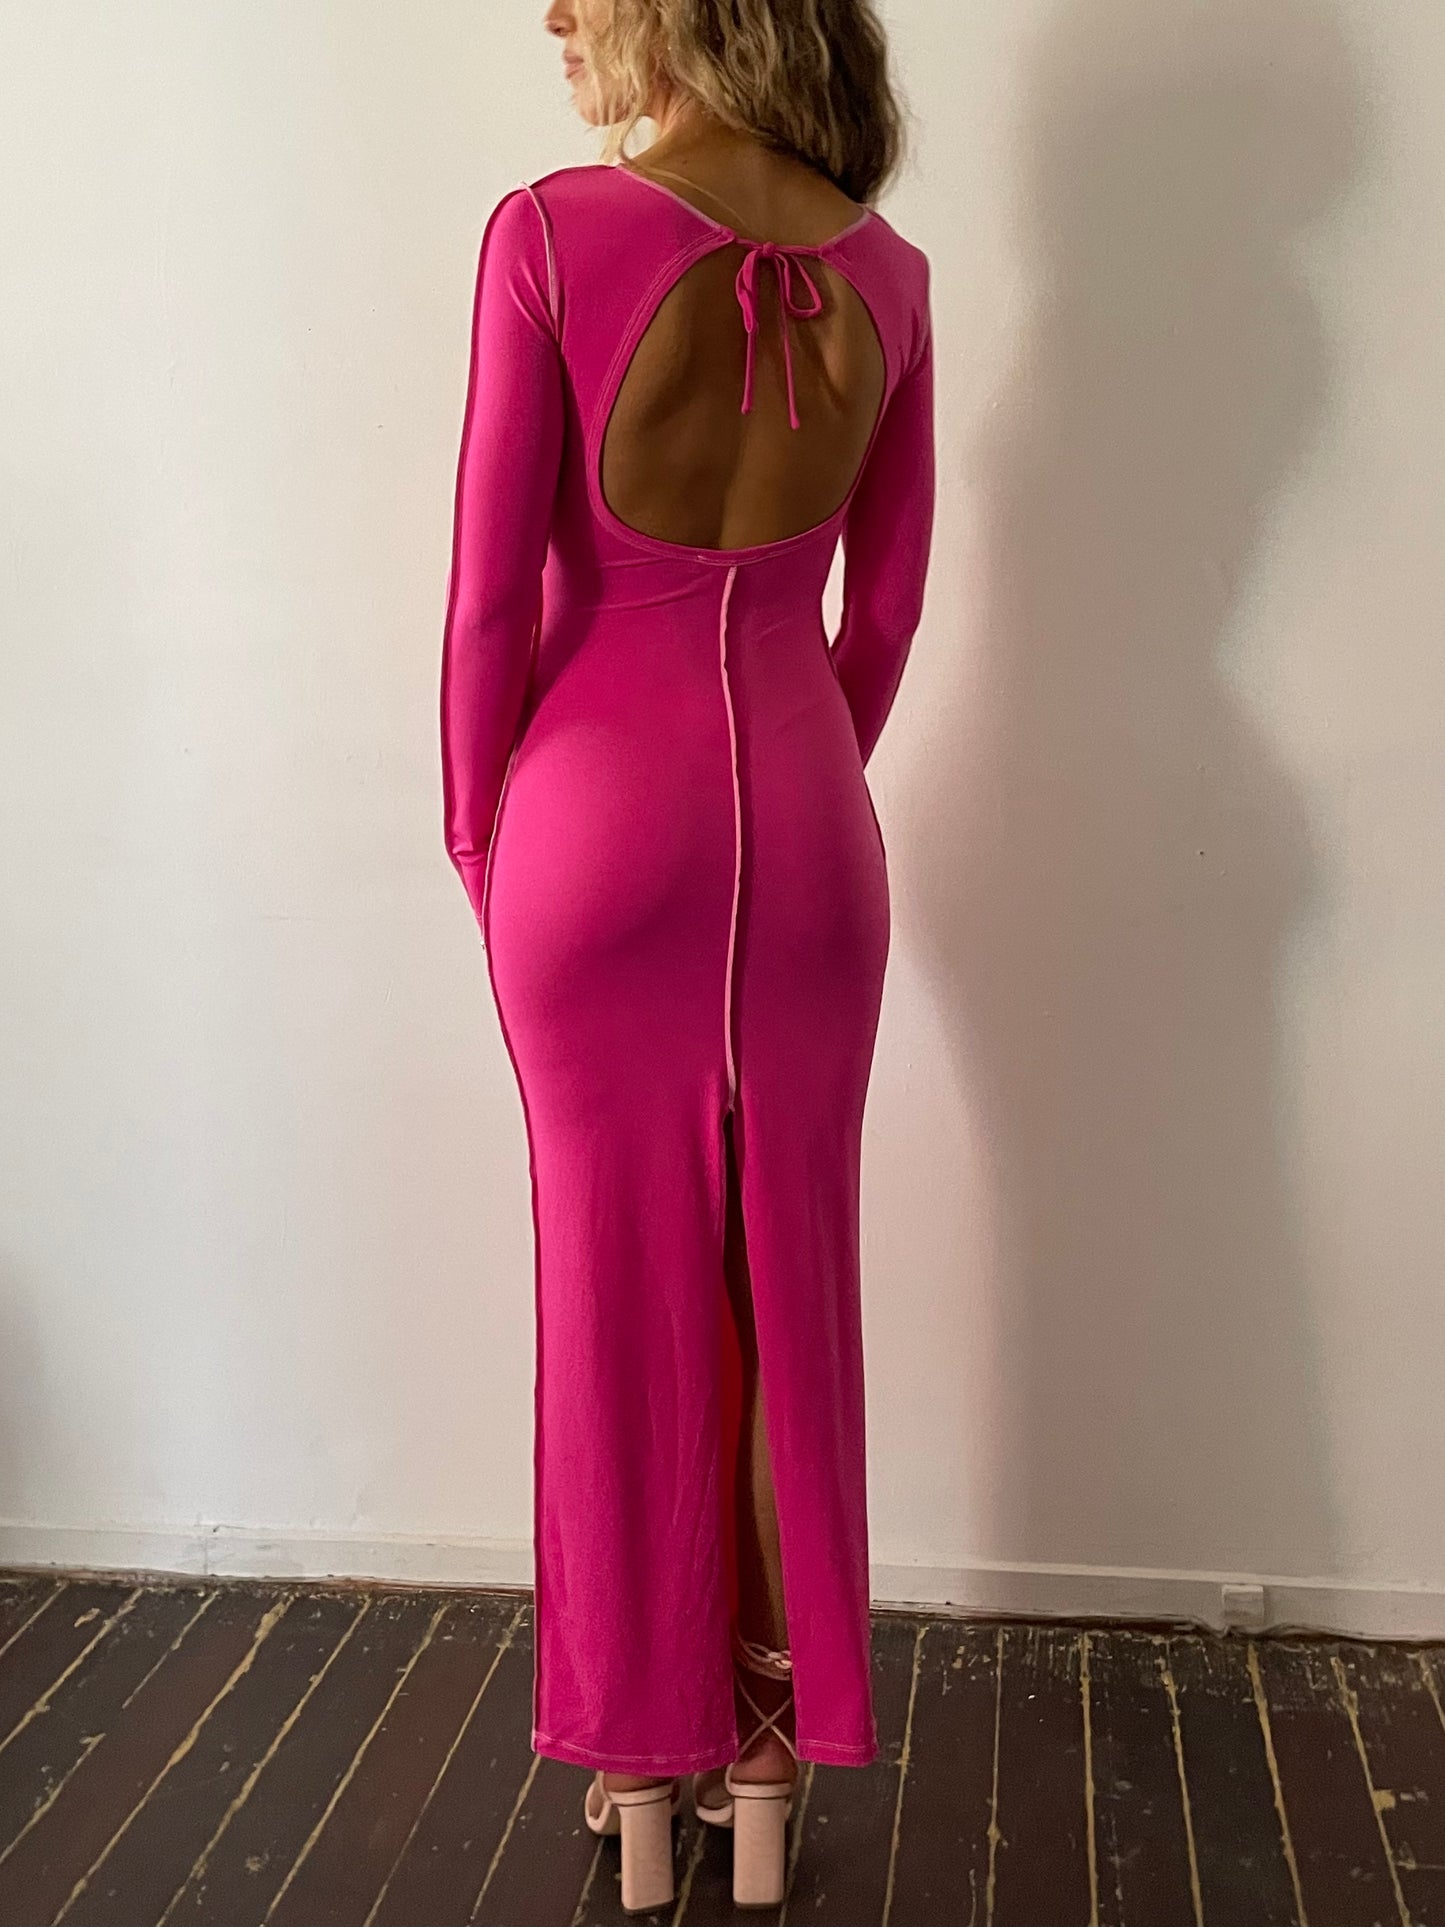 Contrast Maxi - Neon pink with contrast white stitching